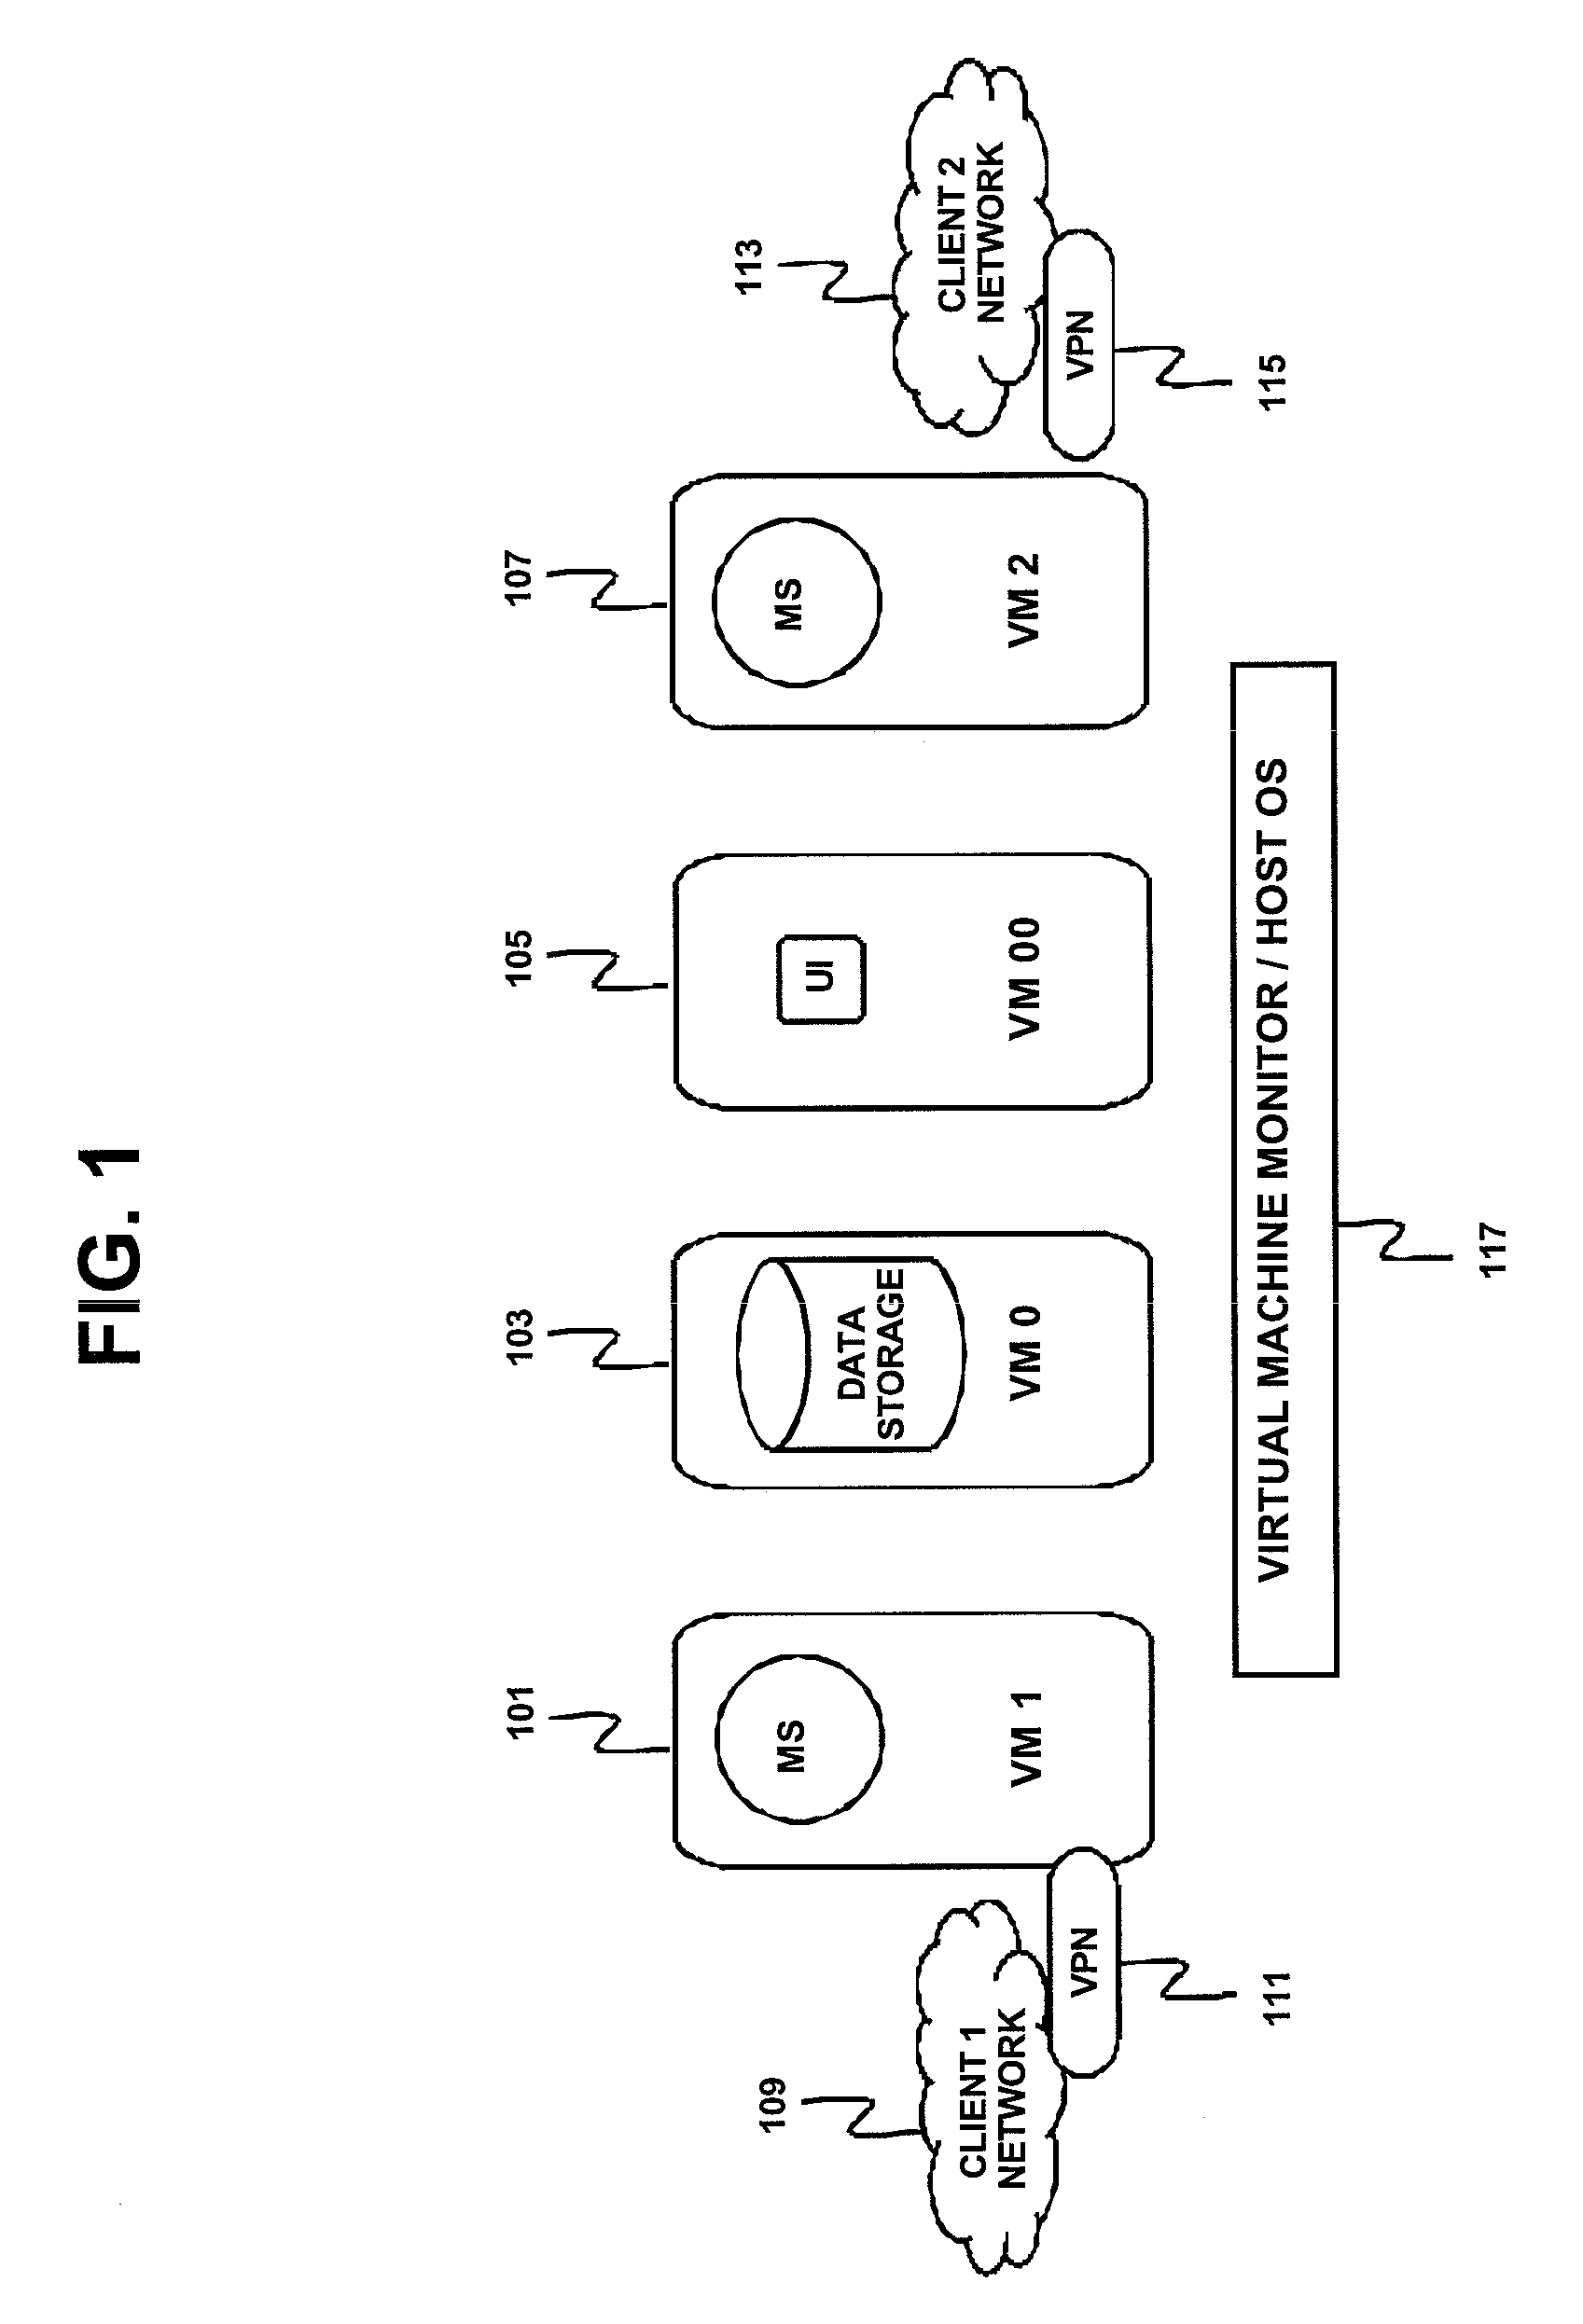 Method, Apparatus And Computer Program Product Implementing Multi-Tenancy For Network Monitoring Tools Using Virtualization Technology